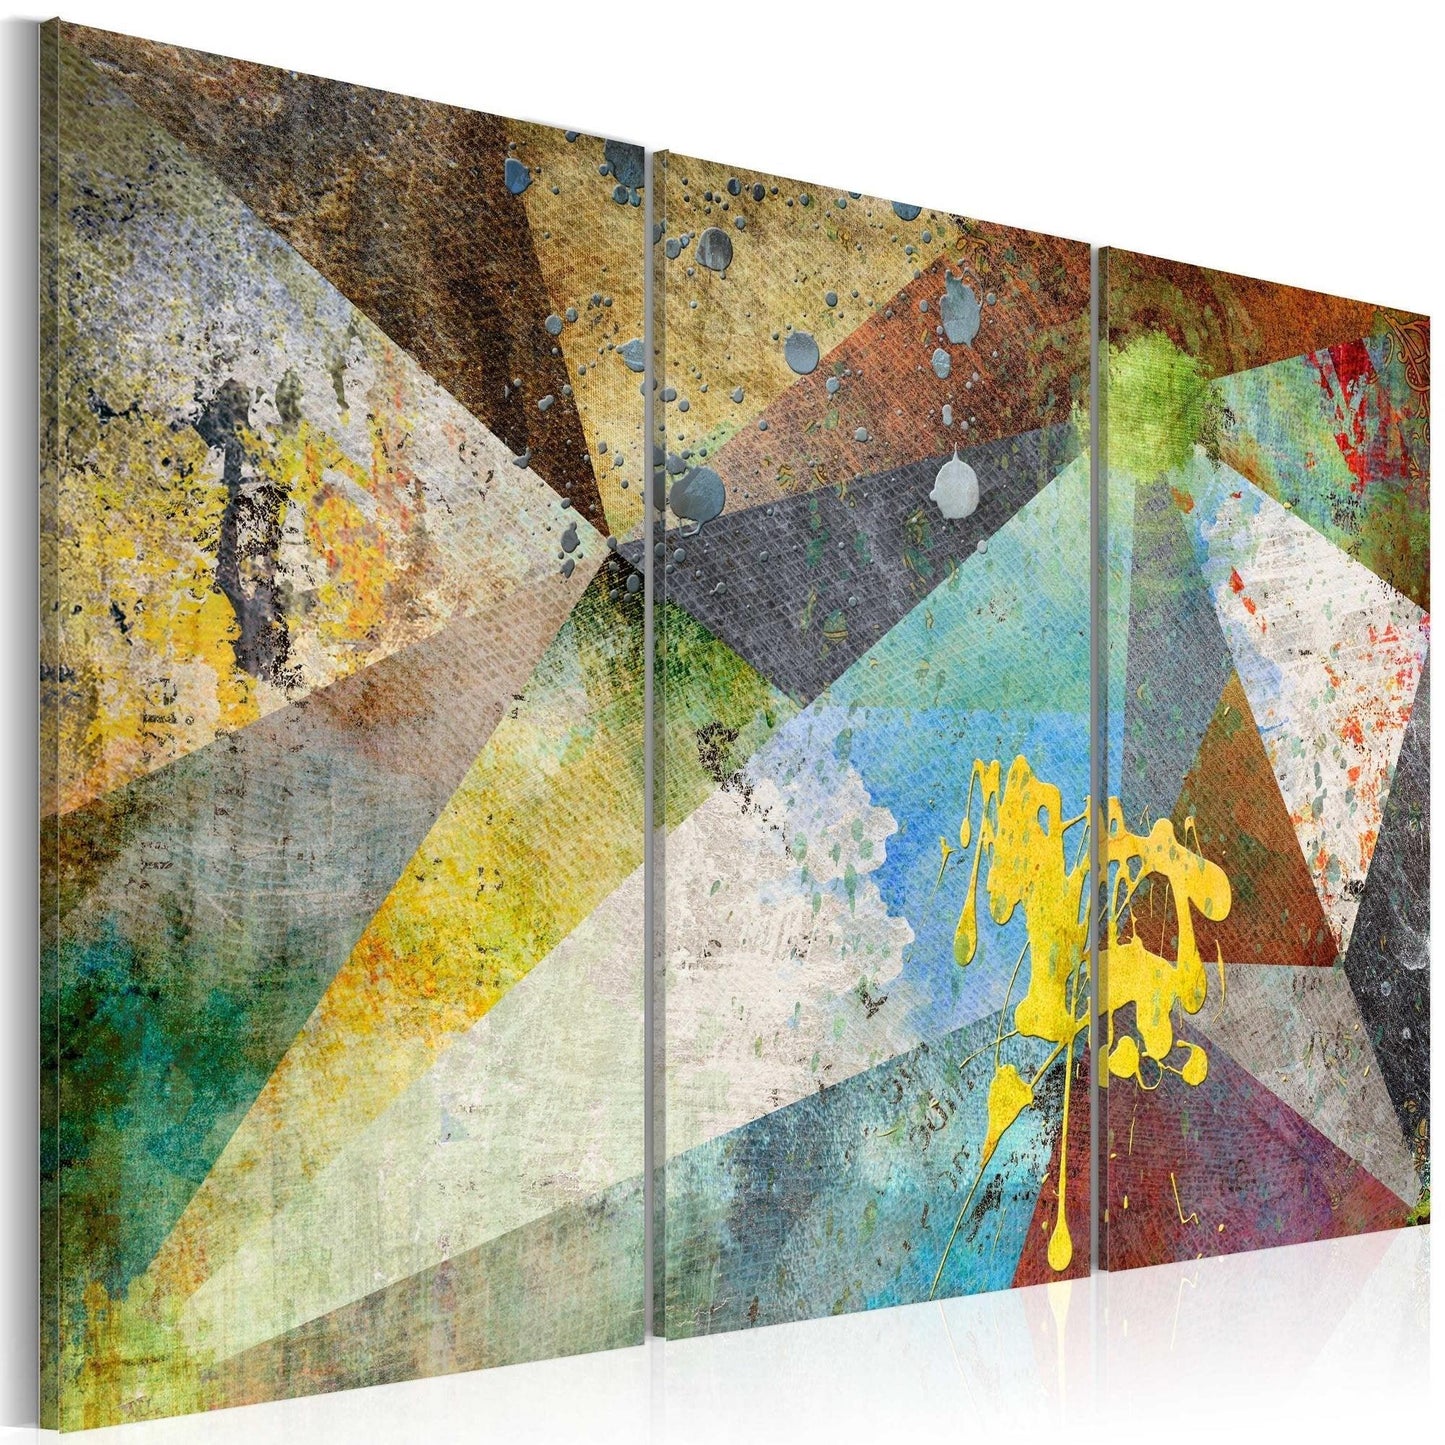 Canvas Print - Through the Prism of Colors - www.trendingbestsellers.com